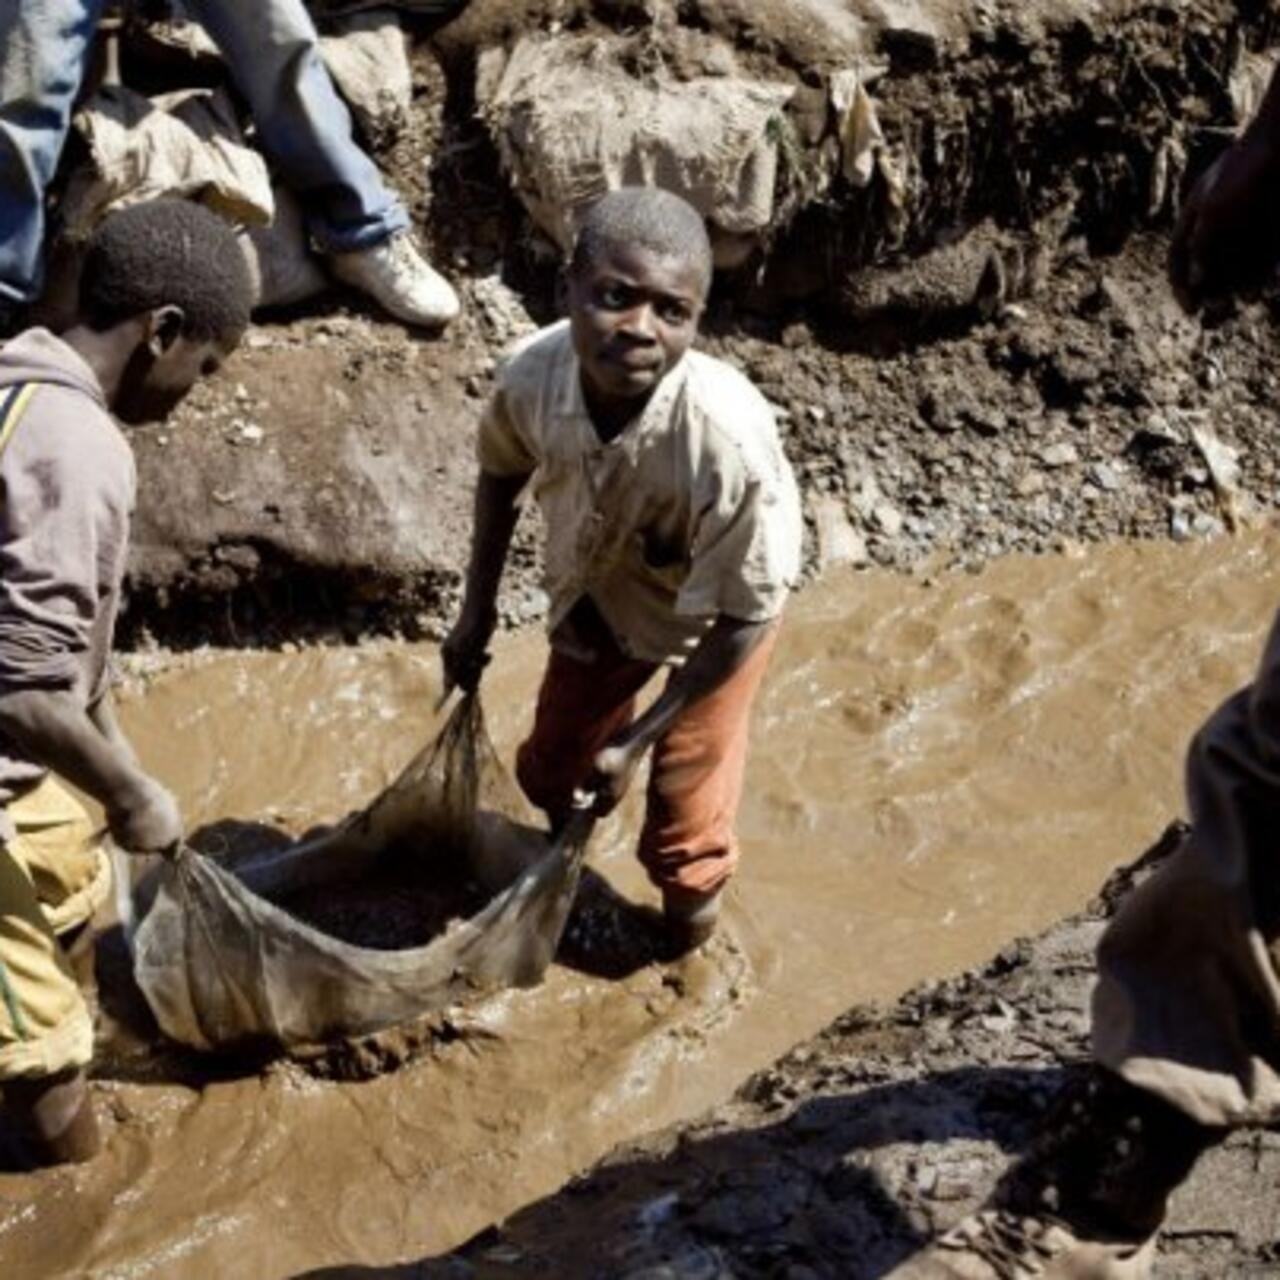 Child labor in the Congo mining for Cobalt for electric car batteries. Most die at a young age.